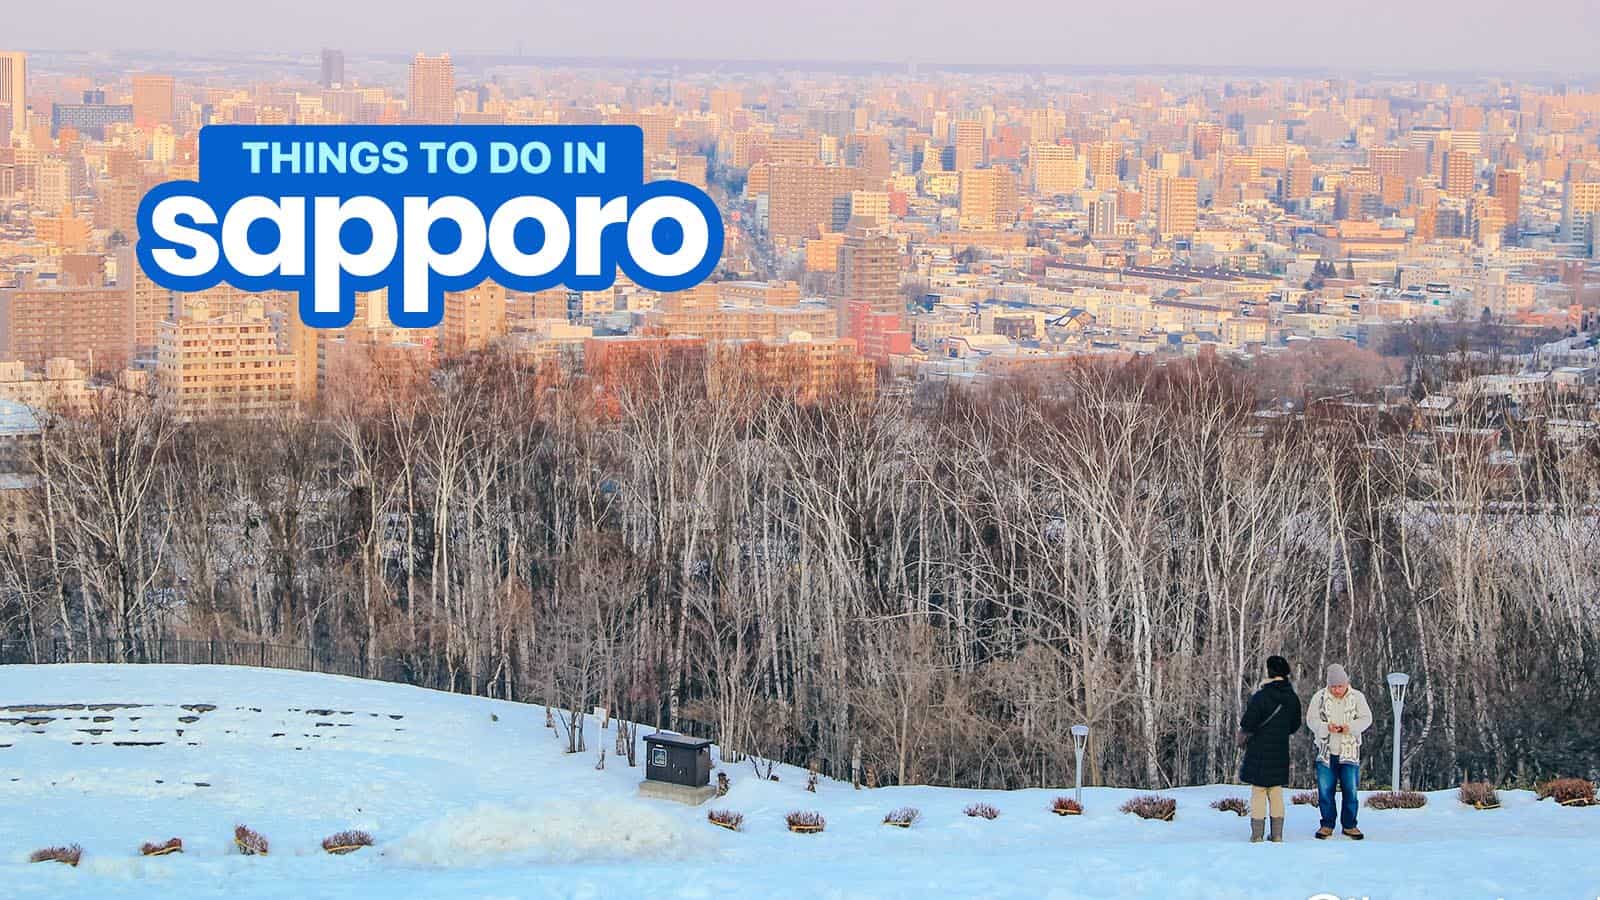 SAPPORO: 20 Best Things to Do & Places to Visit